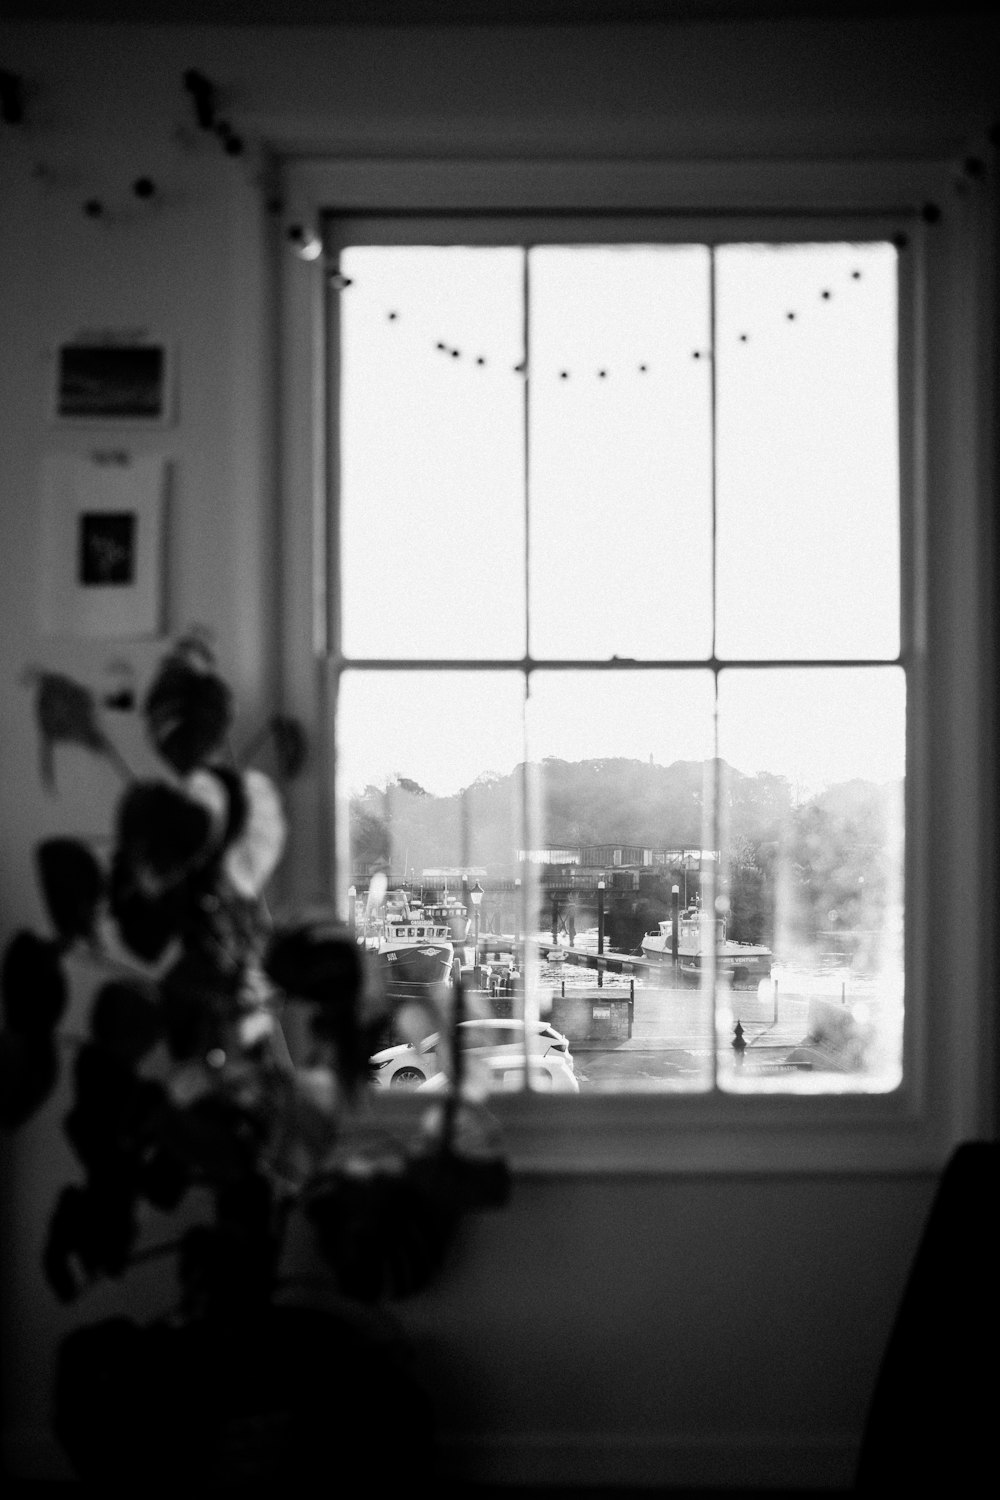 a view looking out of a window